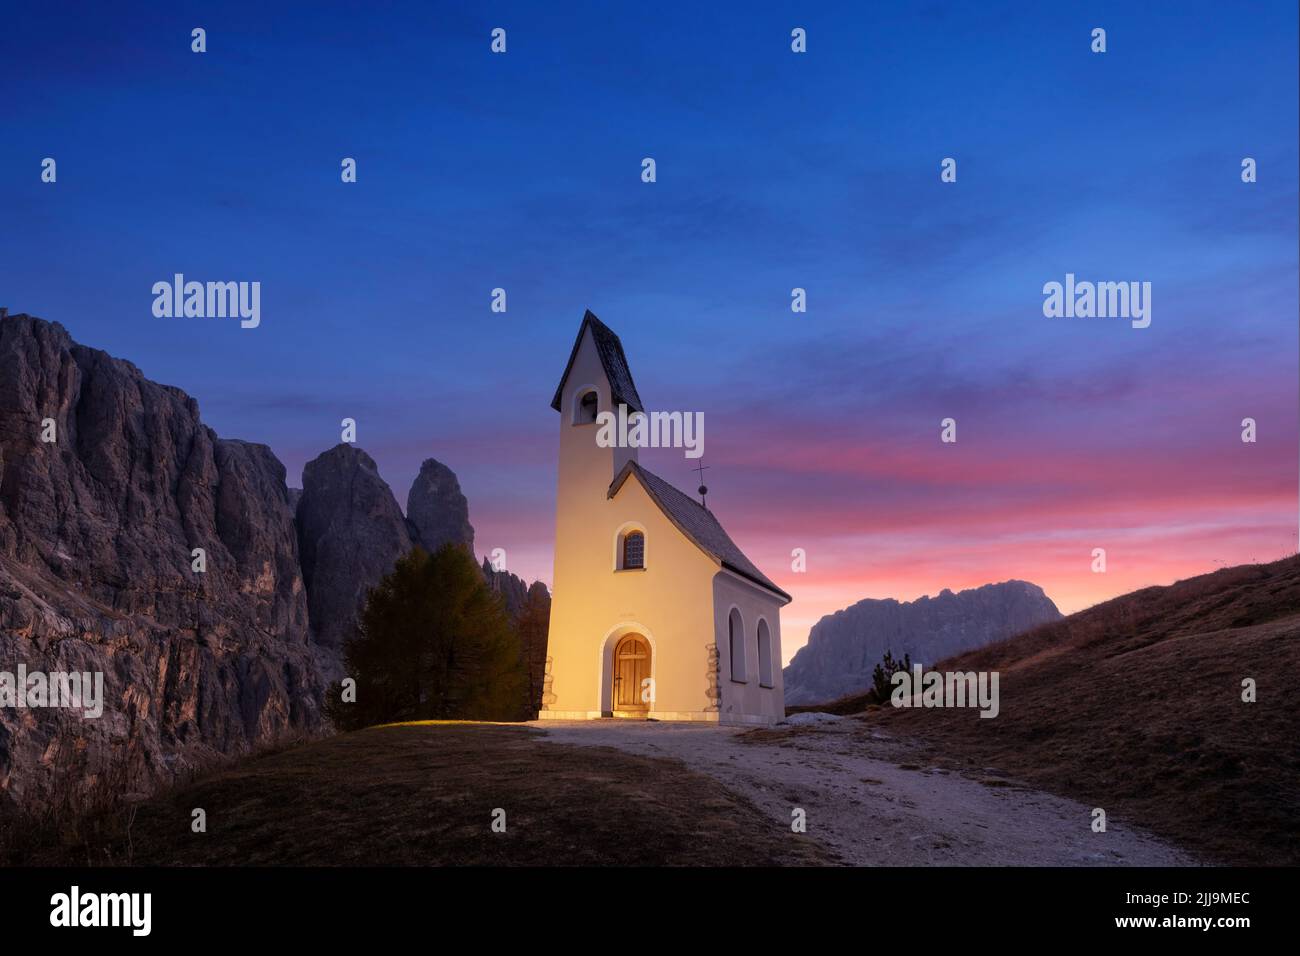 Incredible view on small iIlluminated chapel - Kapelle Ciapela on Gardena Pass, Italian Dolomites mountains. Colorful sunset in Dolomite Alps, Italy. Landscape photography Stock Photo